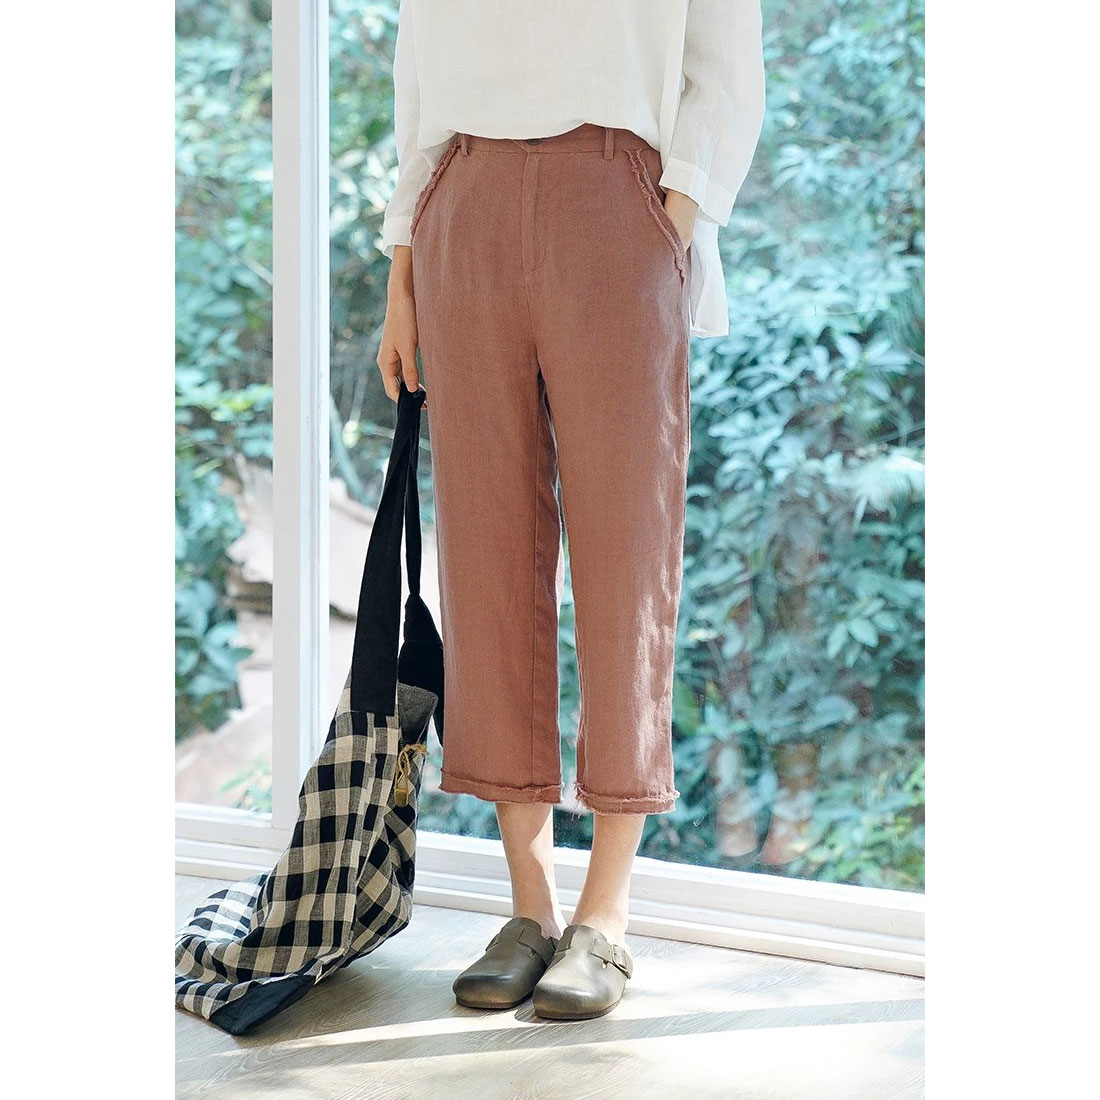 Straight-Leg Linen Pants Womans Fringed Comfy Trousers in Brick Red M L ...